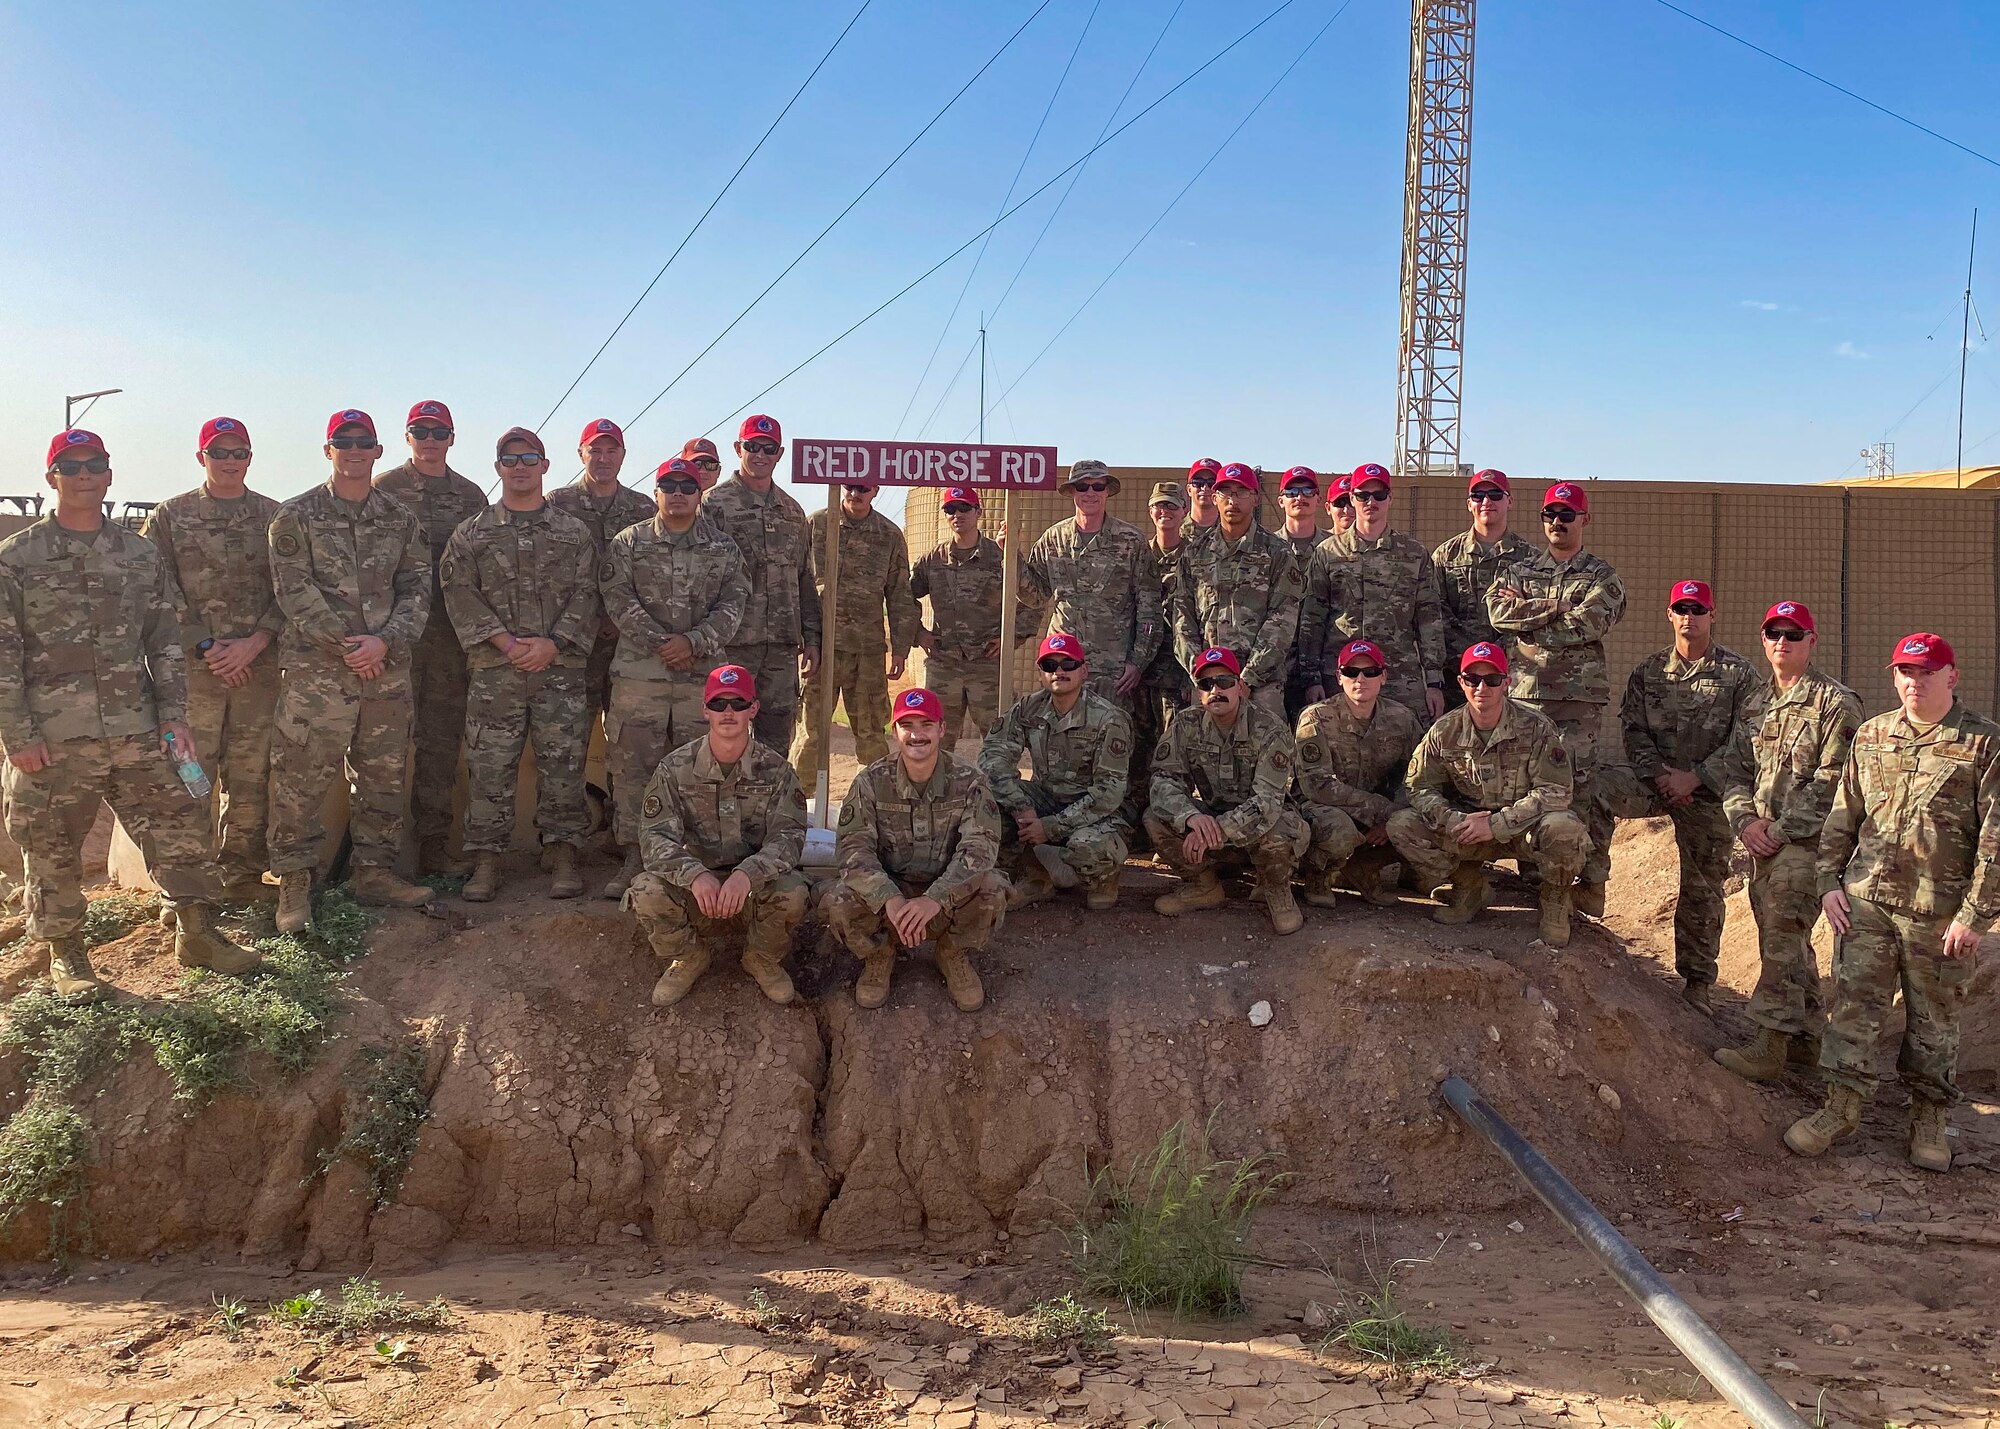 The 819th Expeditionary Rapid Engineer Deployable Heavy Operational Repair Squadron Engineers pose for a photo during a dedication ceremony after completing their long-term build at Nigerian Air Base 201, Niger, Aug. 19, 2020. In honor of the squadron’s many achievements, to include finalizing the largest Airmen-led construction project in U.S. Air Force history, the main road was named “RED HORSE Road.” The ceremony marked the end of the squadron’s continuous presence in Agadez since April 2016. (Courtesy Photo)